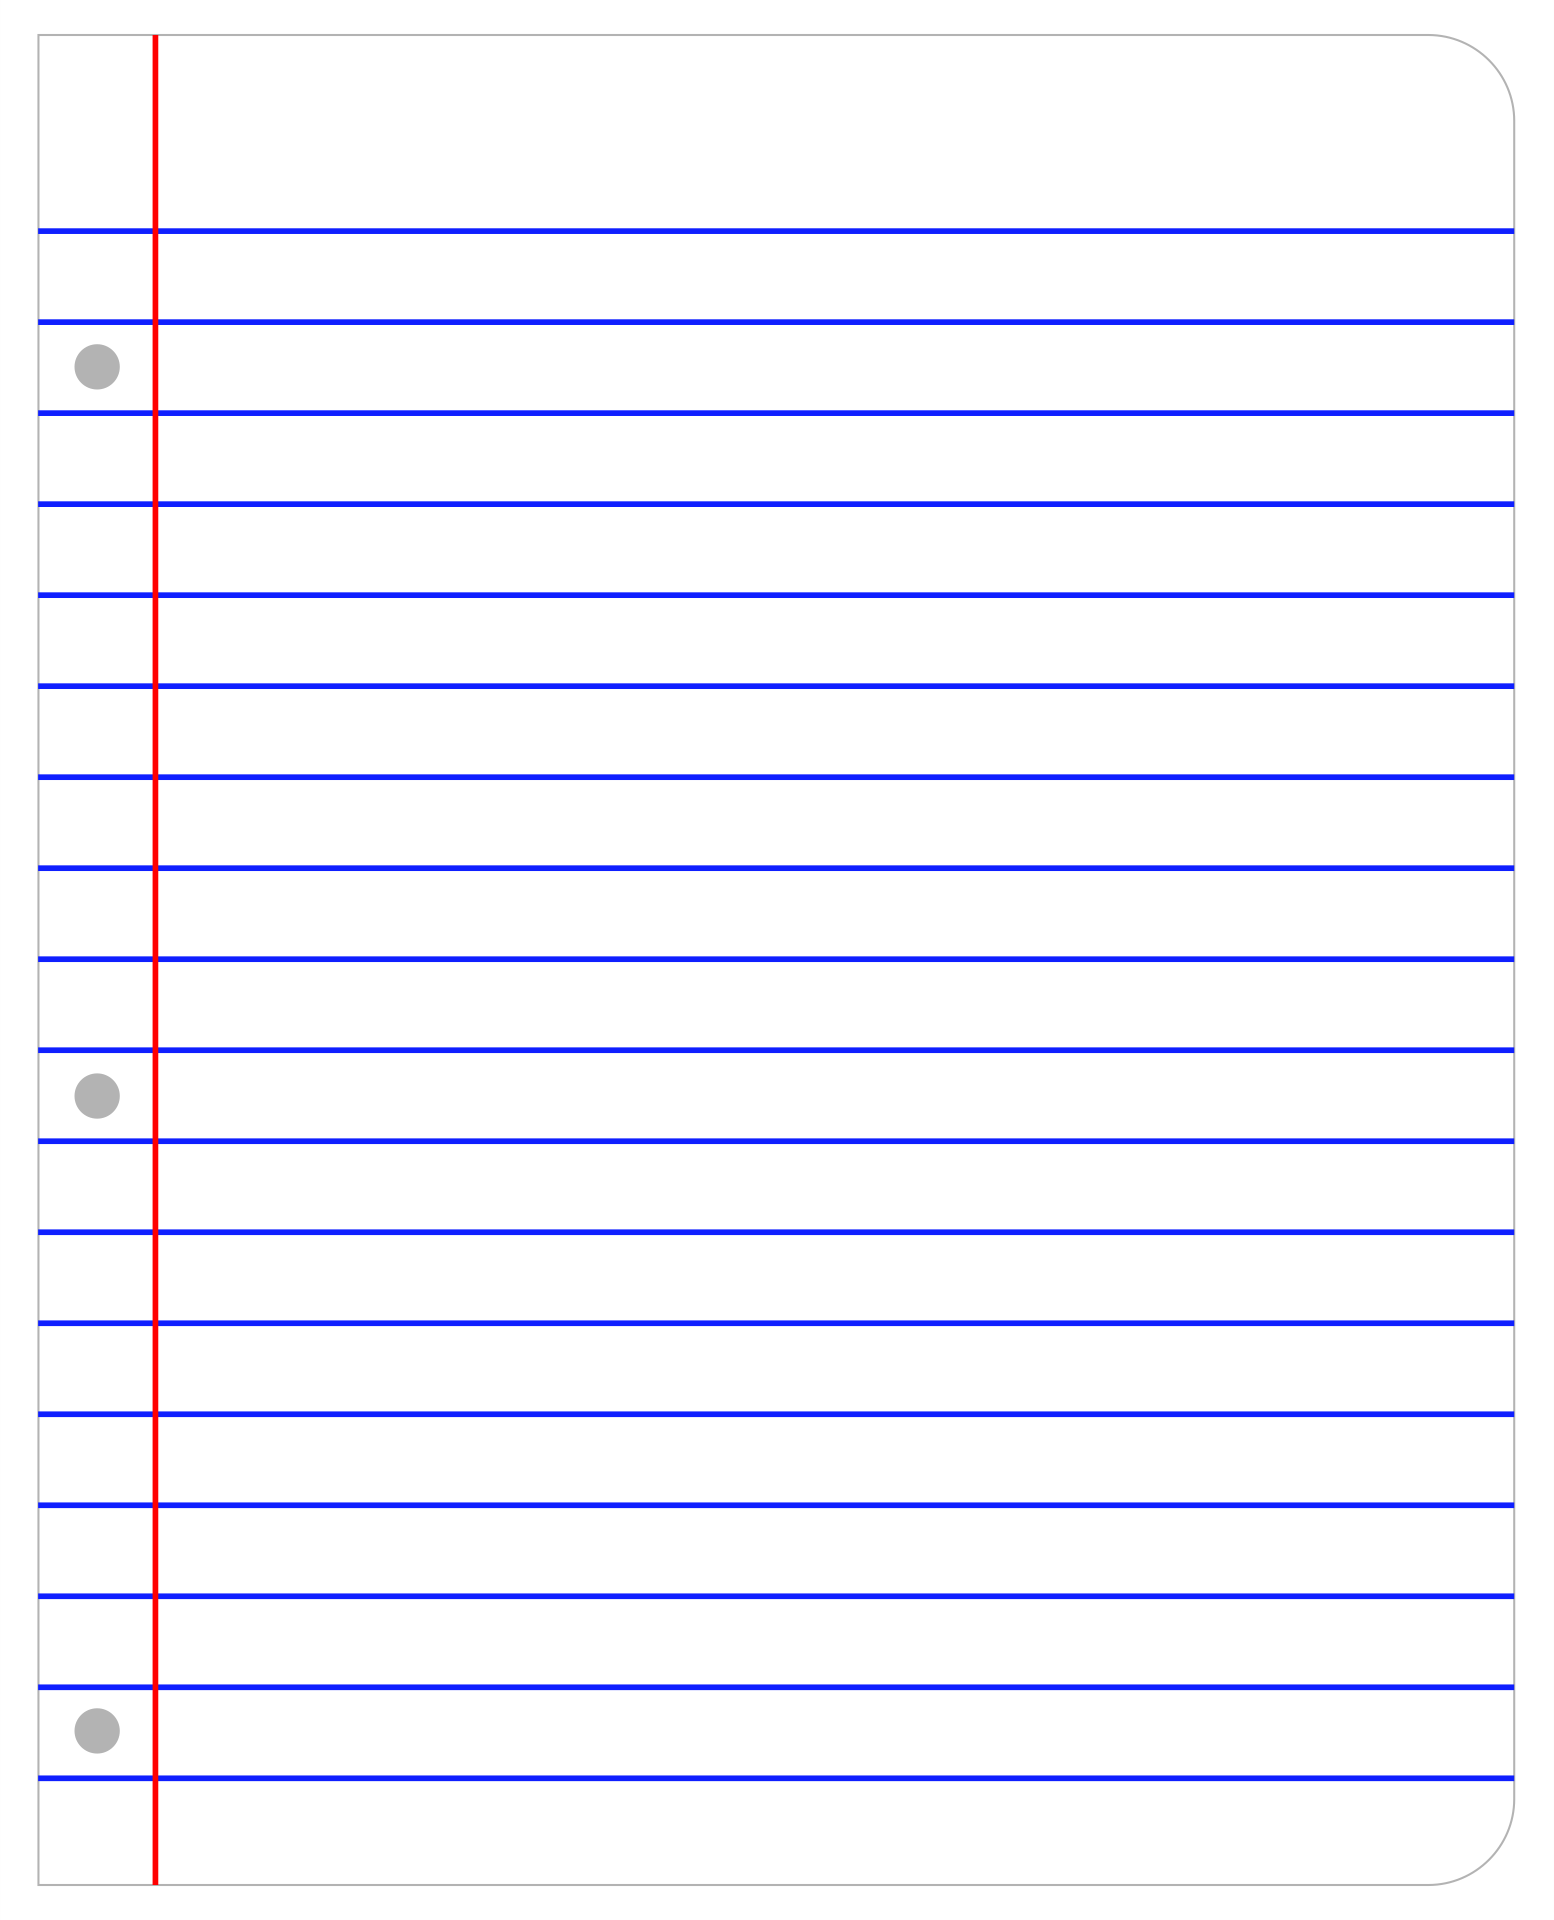 Wide Lined Paper Printable